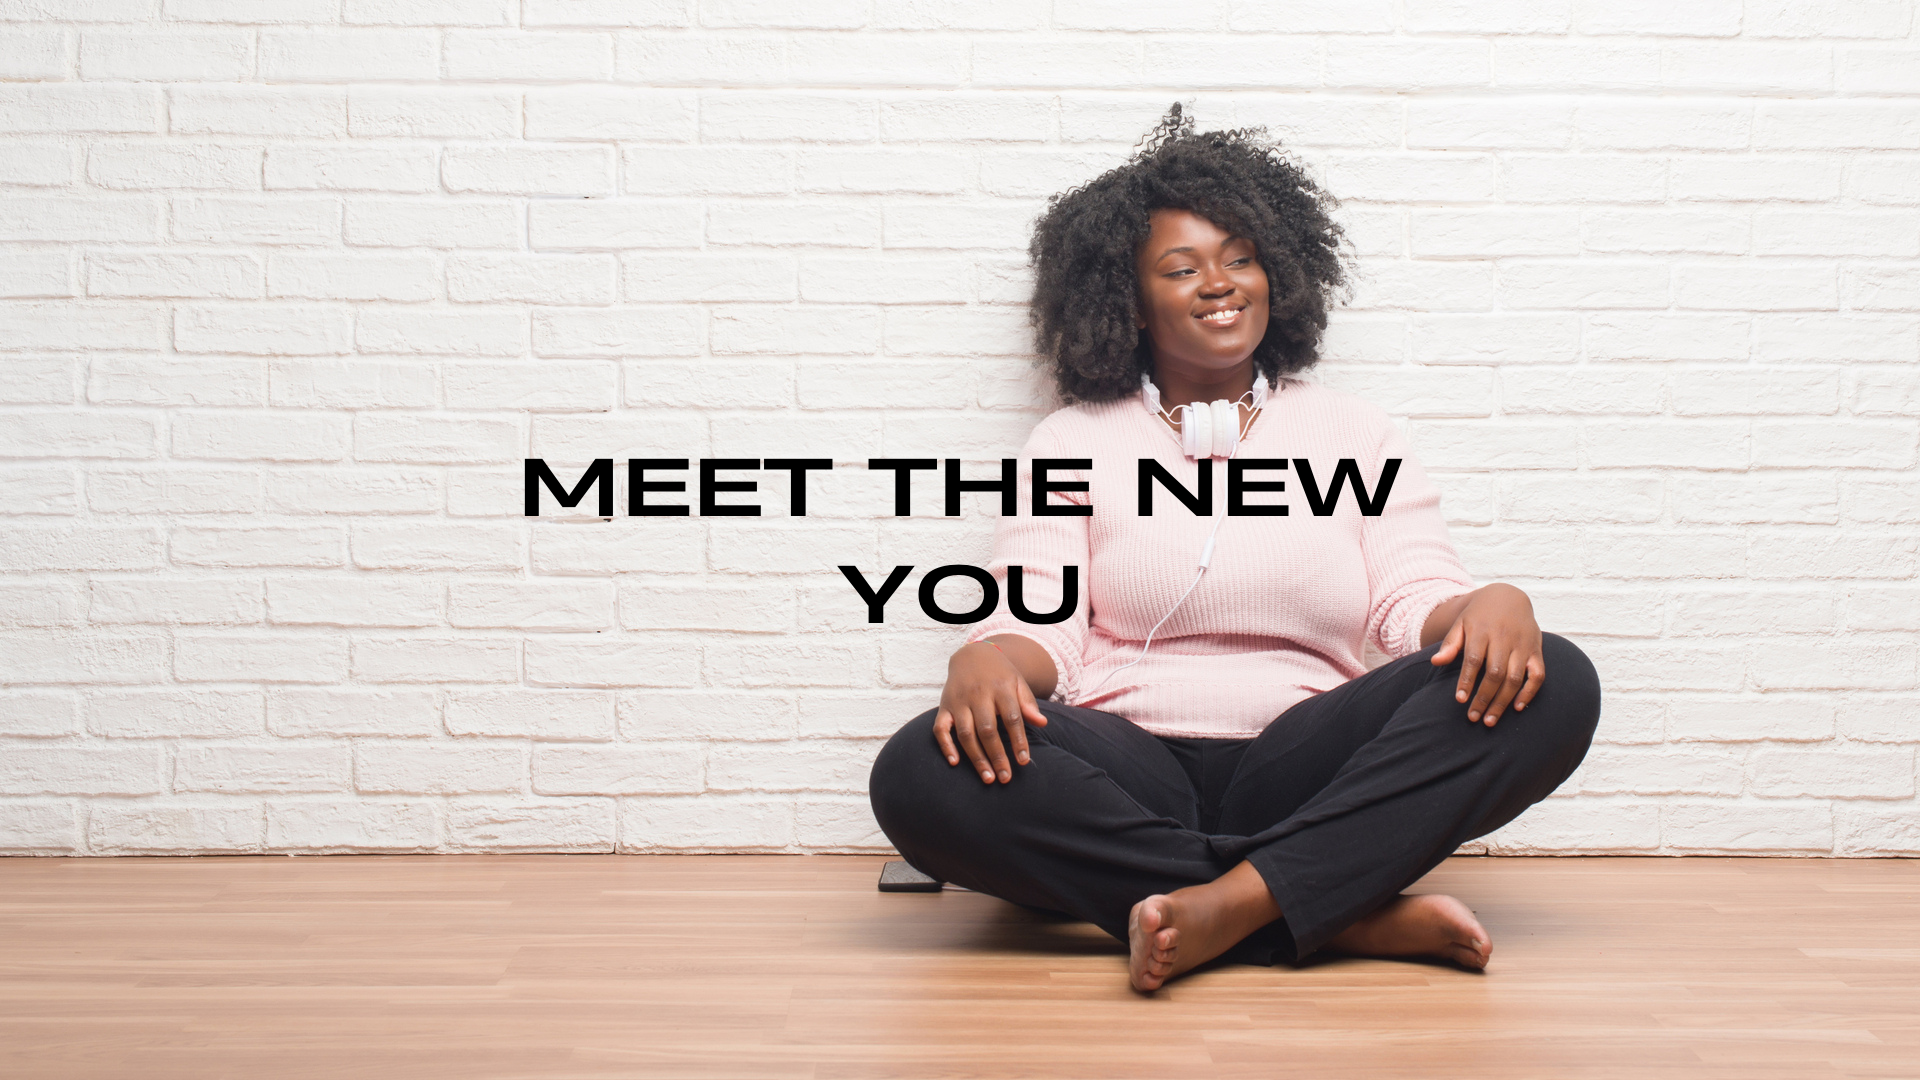 Meet The New You: How To Change Your Story & Break Unhealthy Habits